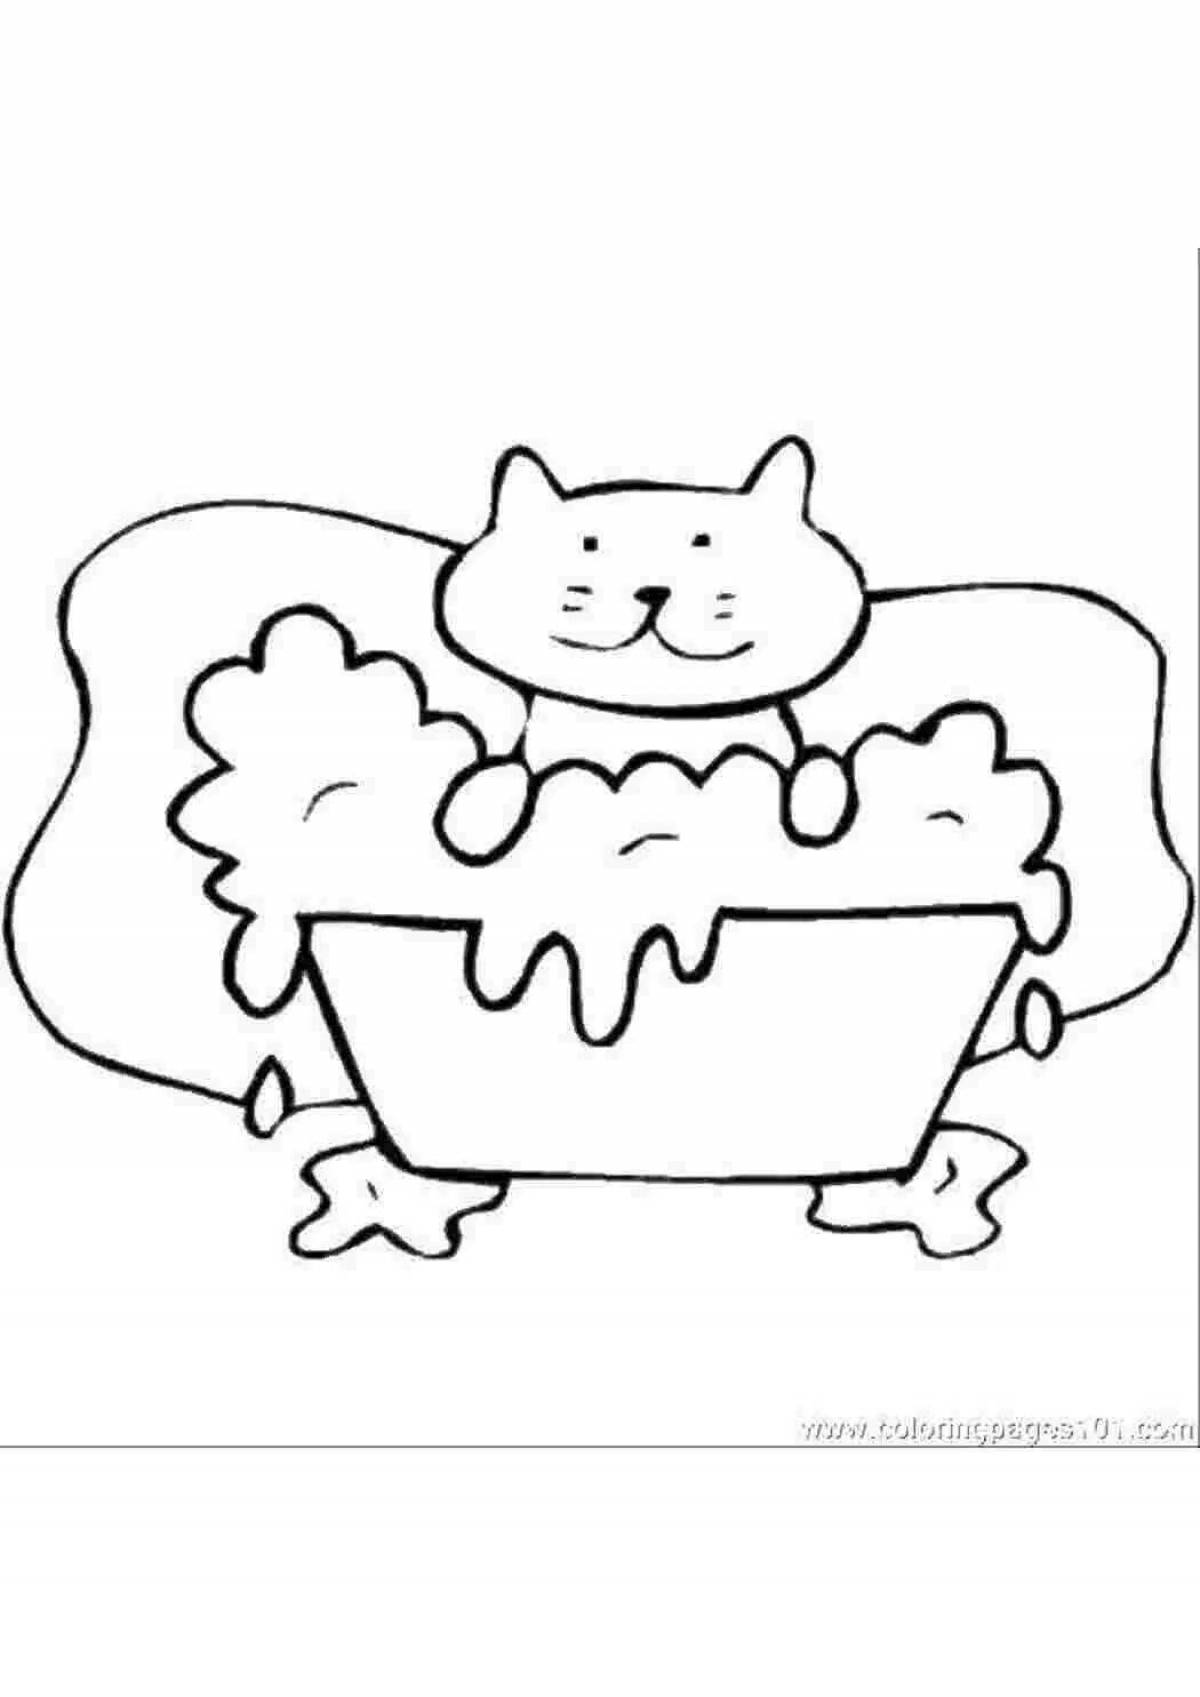 Coloring page grinning cat in a mug